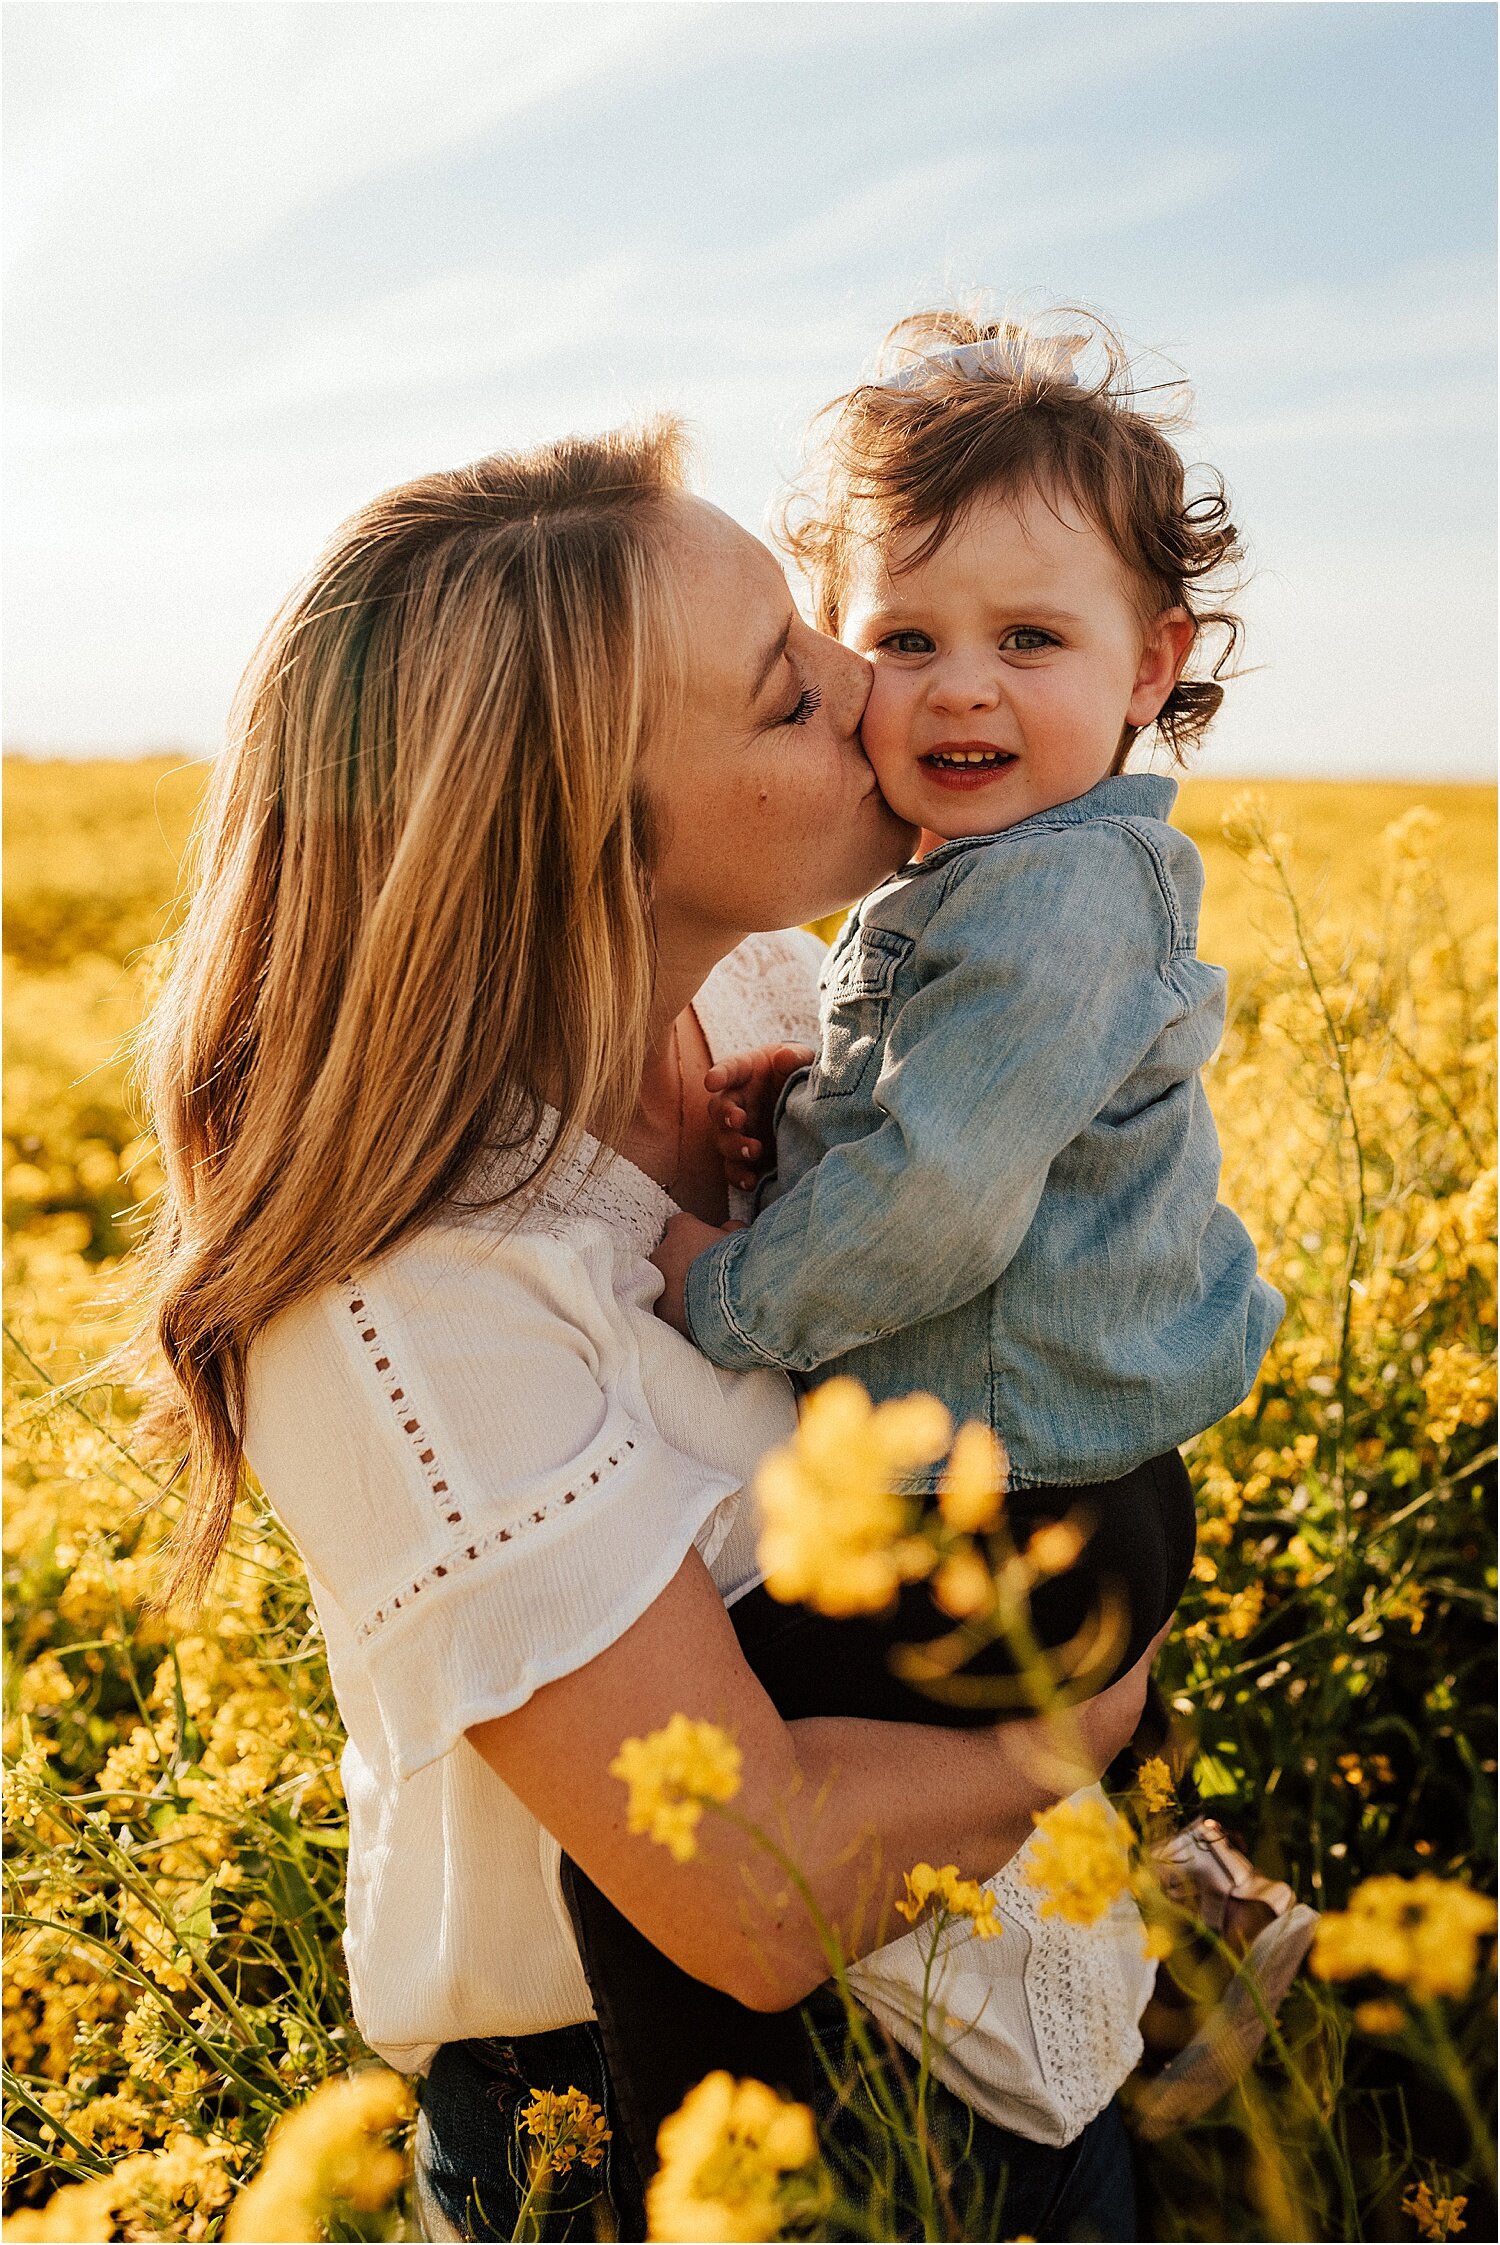 spring field of yellow flowers family session15.jpg